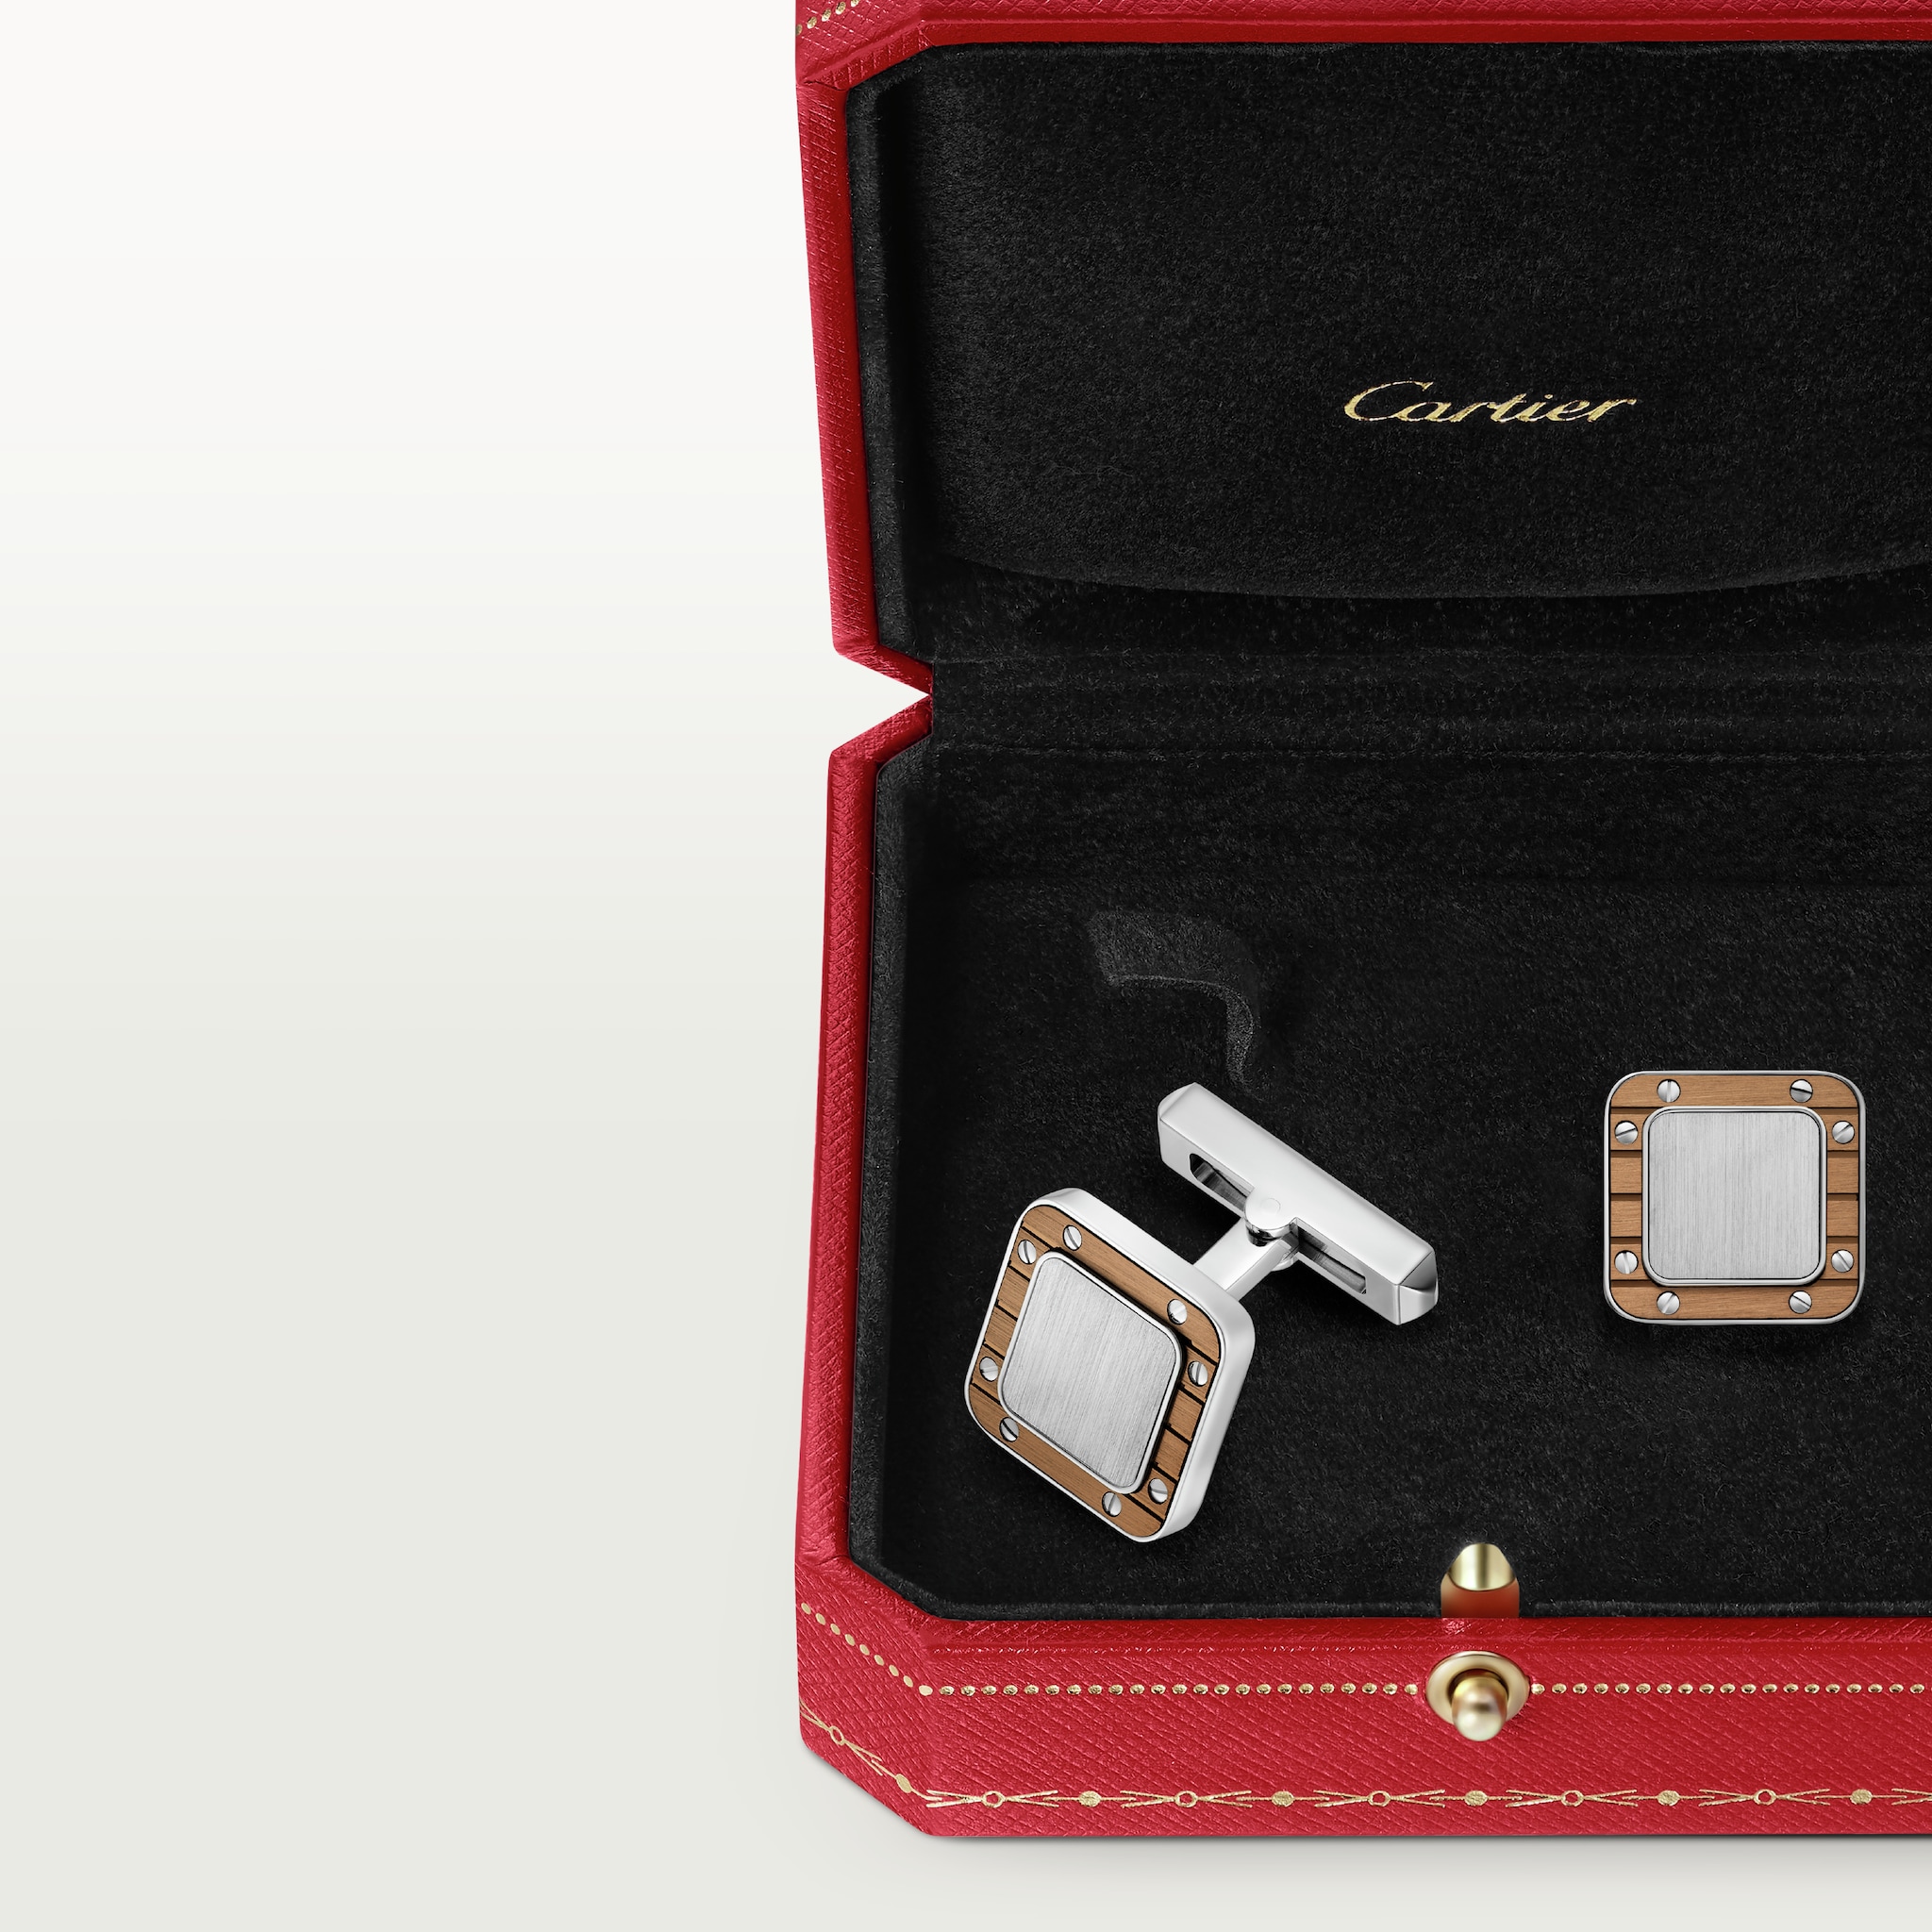 Santos de Cartier cufflinksPalladium-finish sterling silver and striated metal covered with amber brown PVD